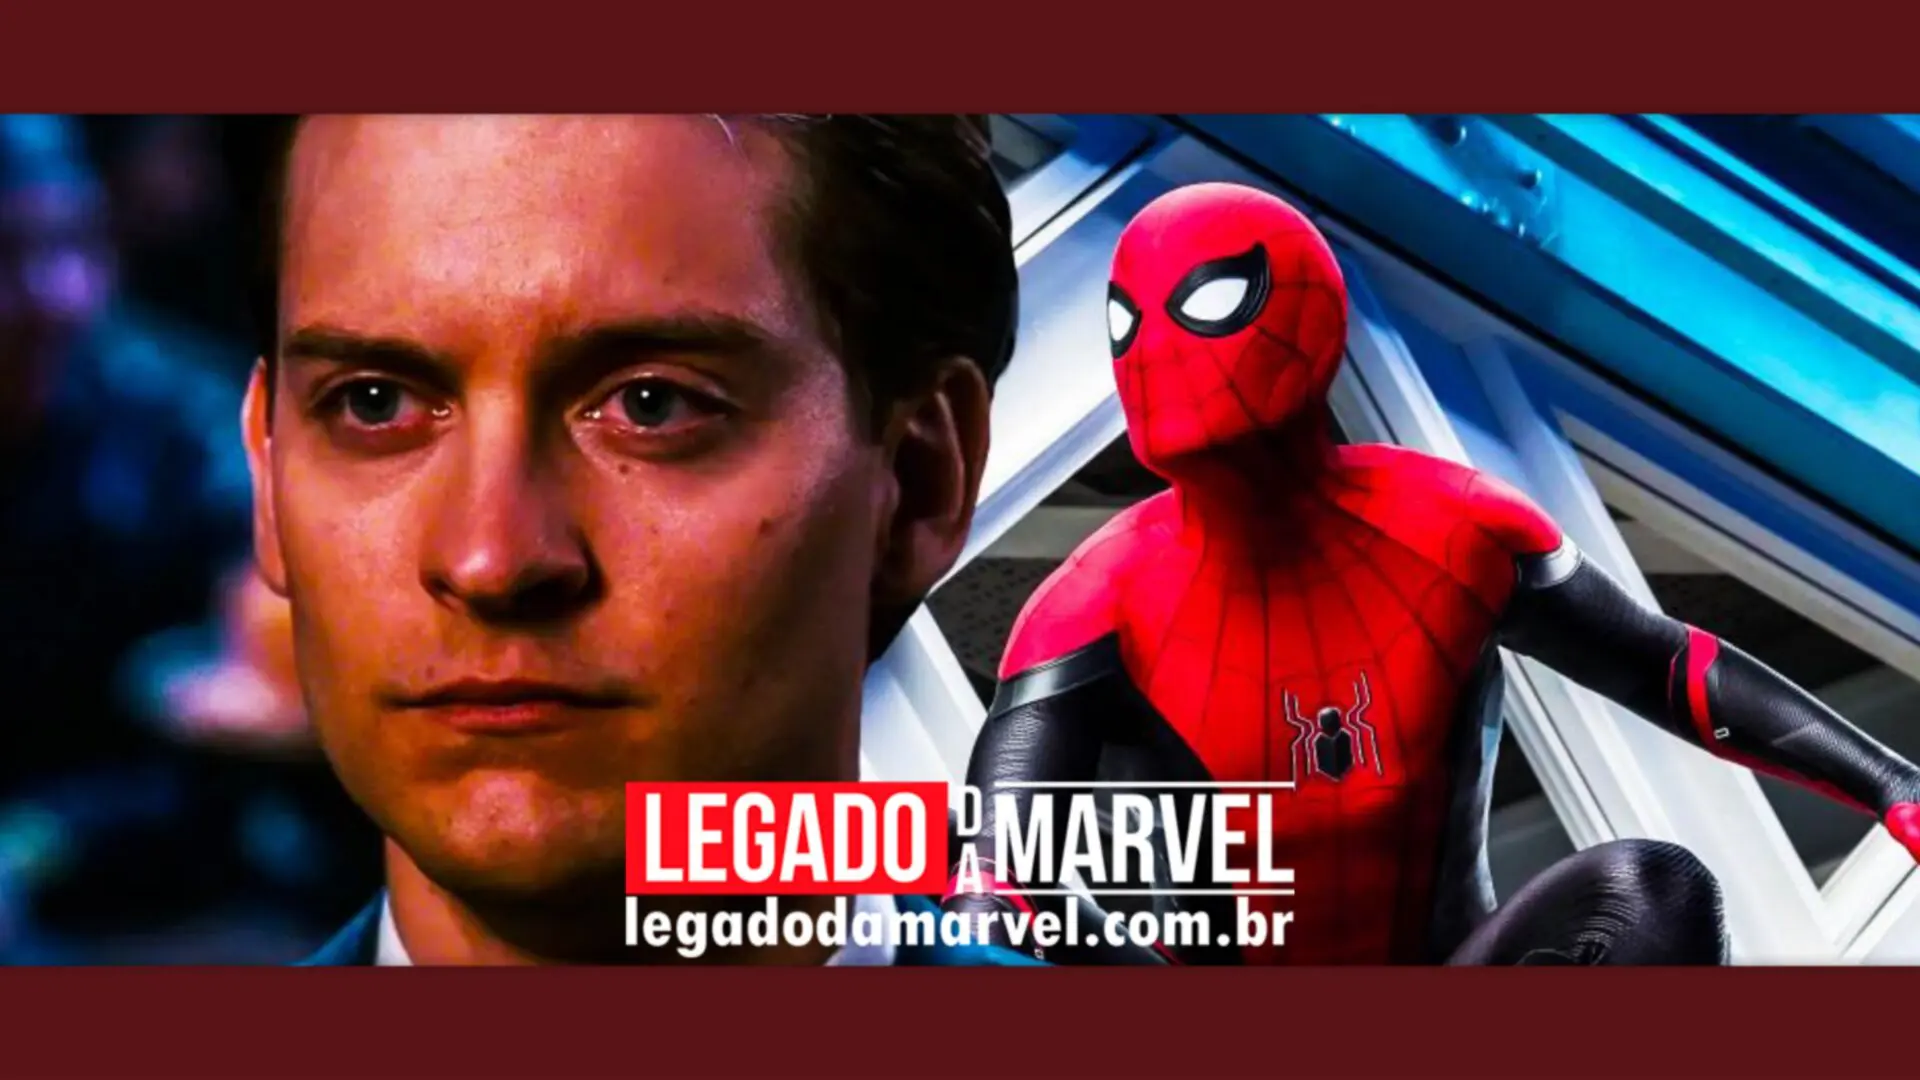 Tobey Maguire - Rotten Tomatoes